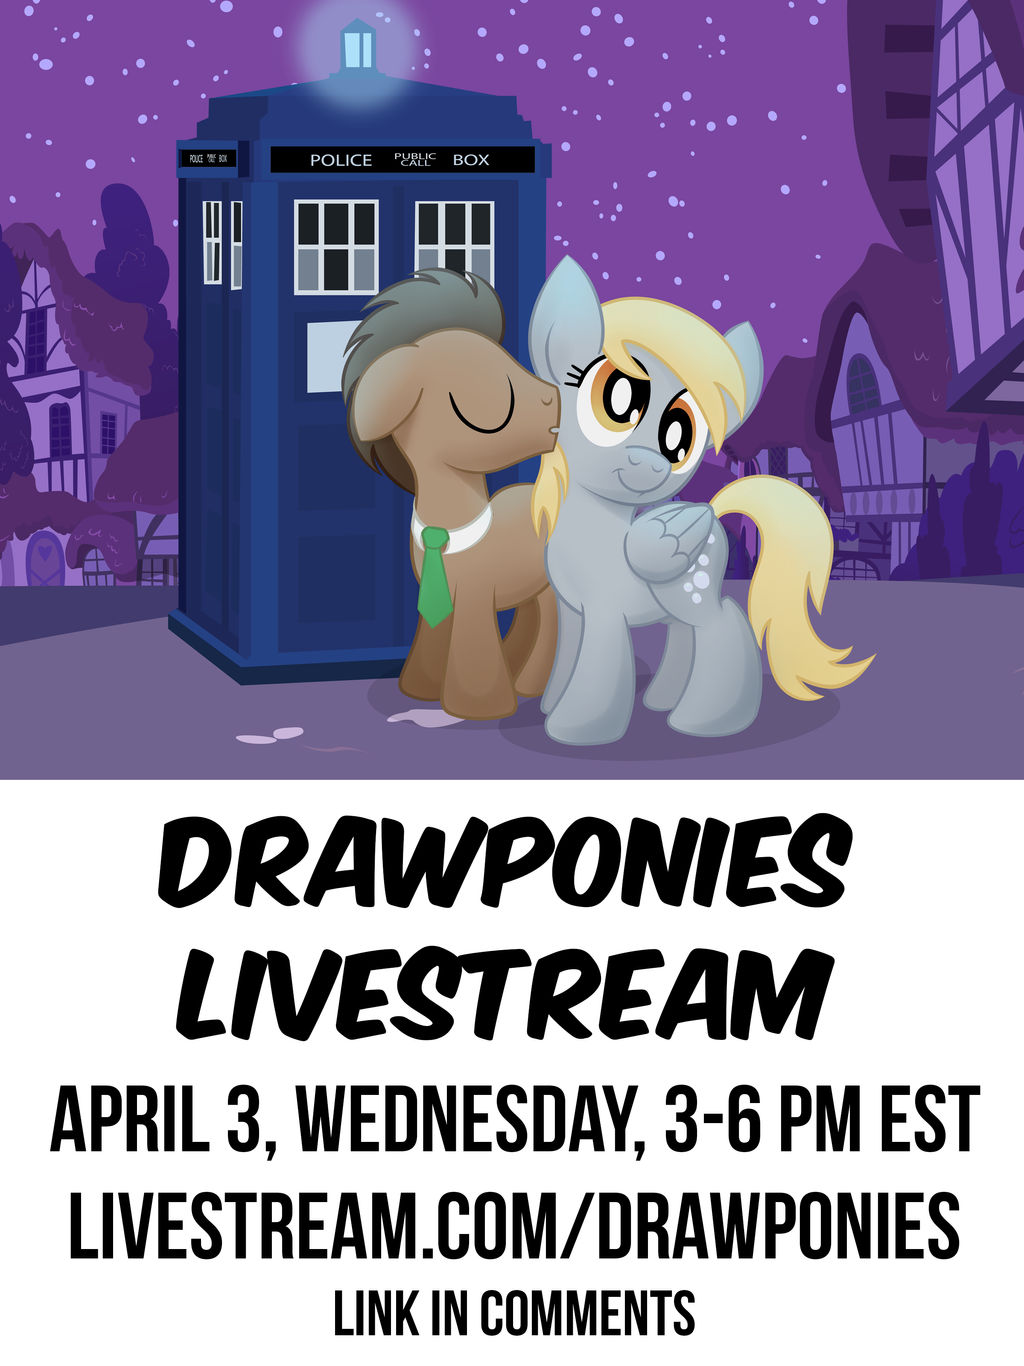 Livestream WEDNESDAY April 3 from 3 to 6 pm EST